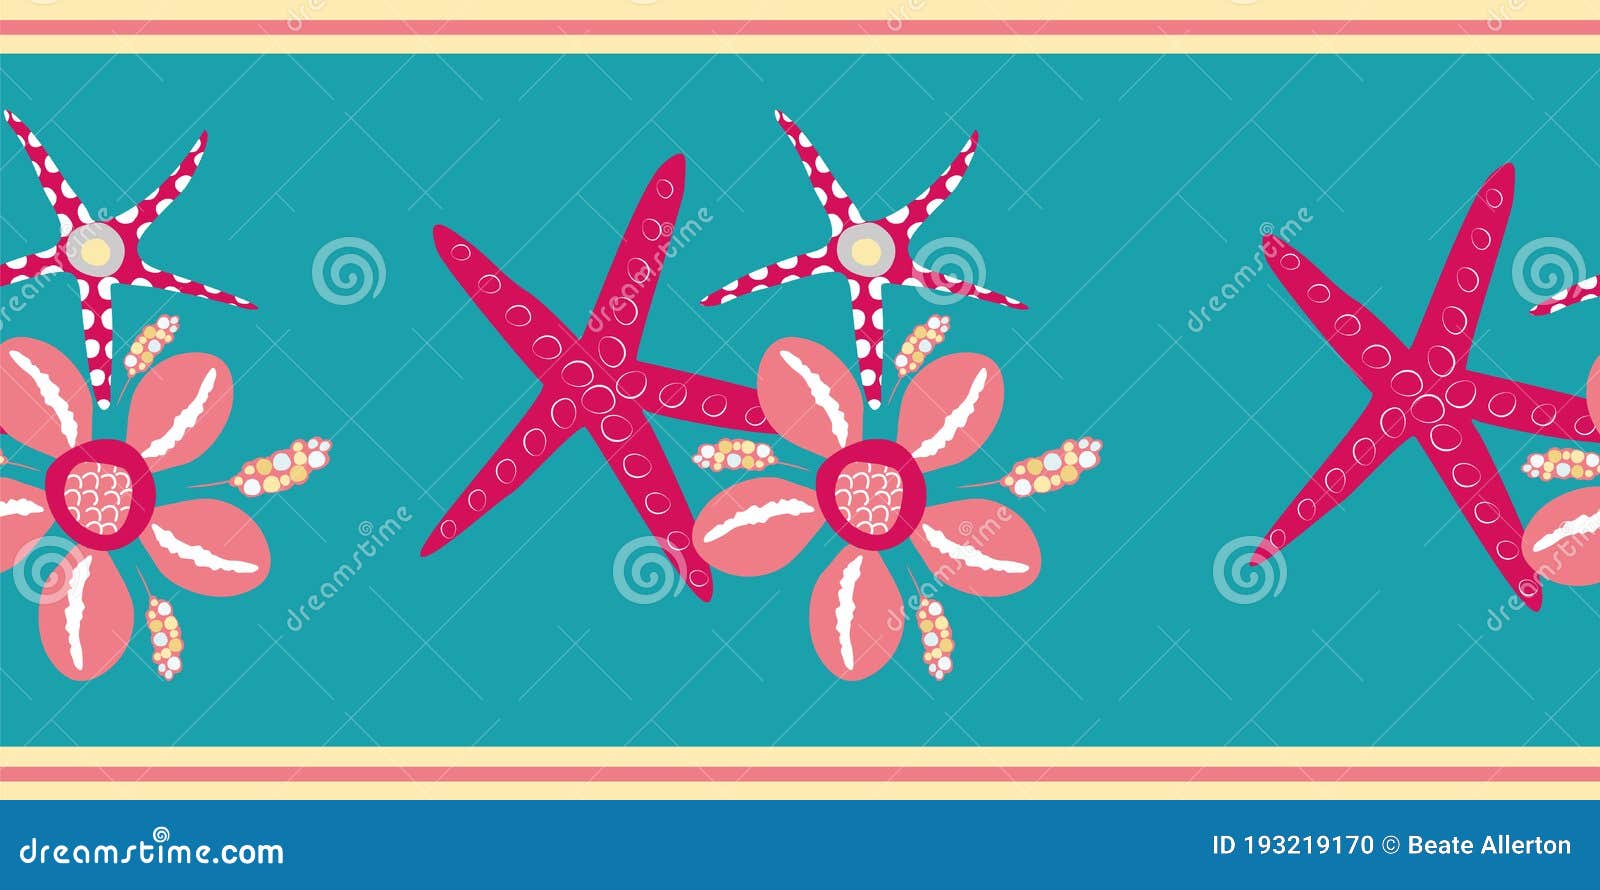 starfish and cowrie shell  border. luxurious pink and aqua blue banner with gold edging. hand drawn trio of marine